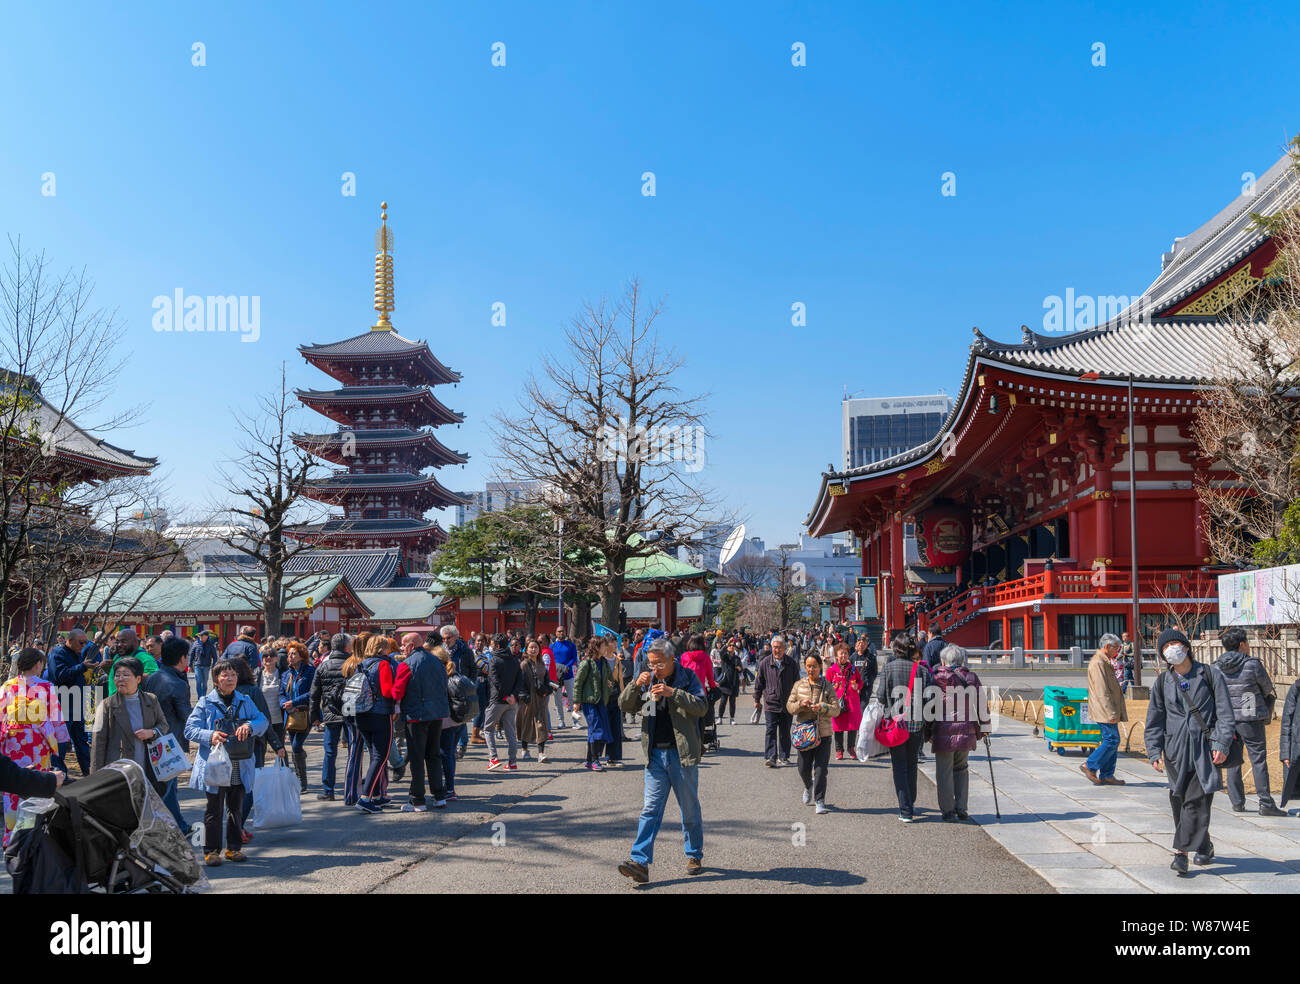 Senso-ji temple complex, an ancient Buddhist temple in the Asakusa district, Tokyo, Japan Stock Photo